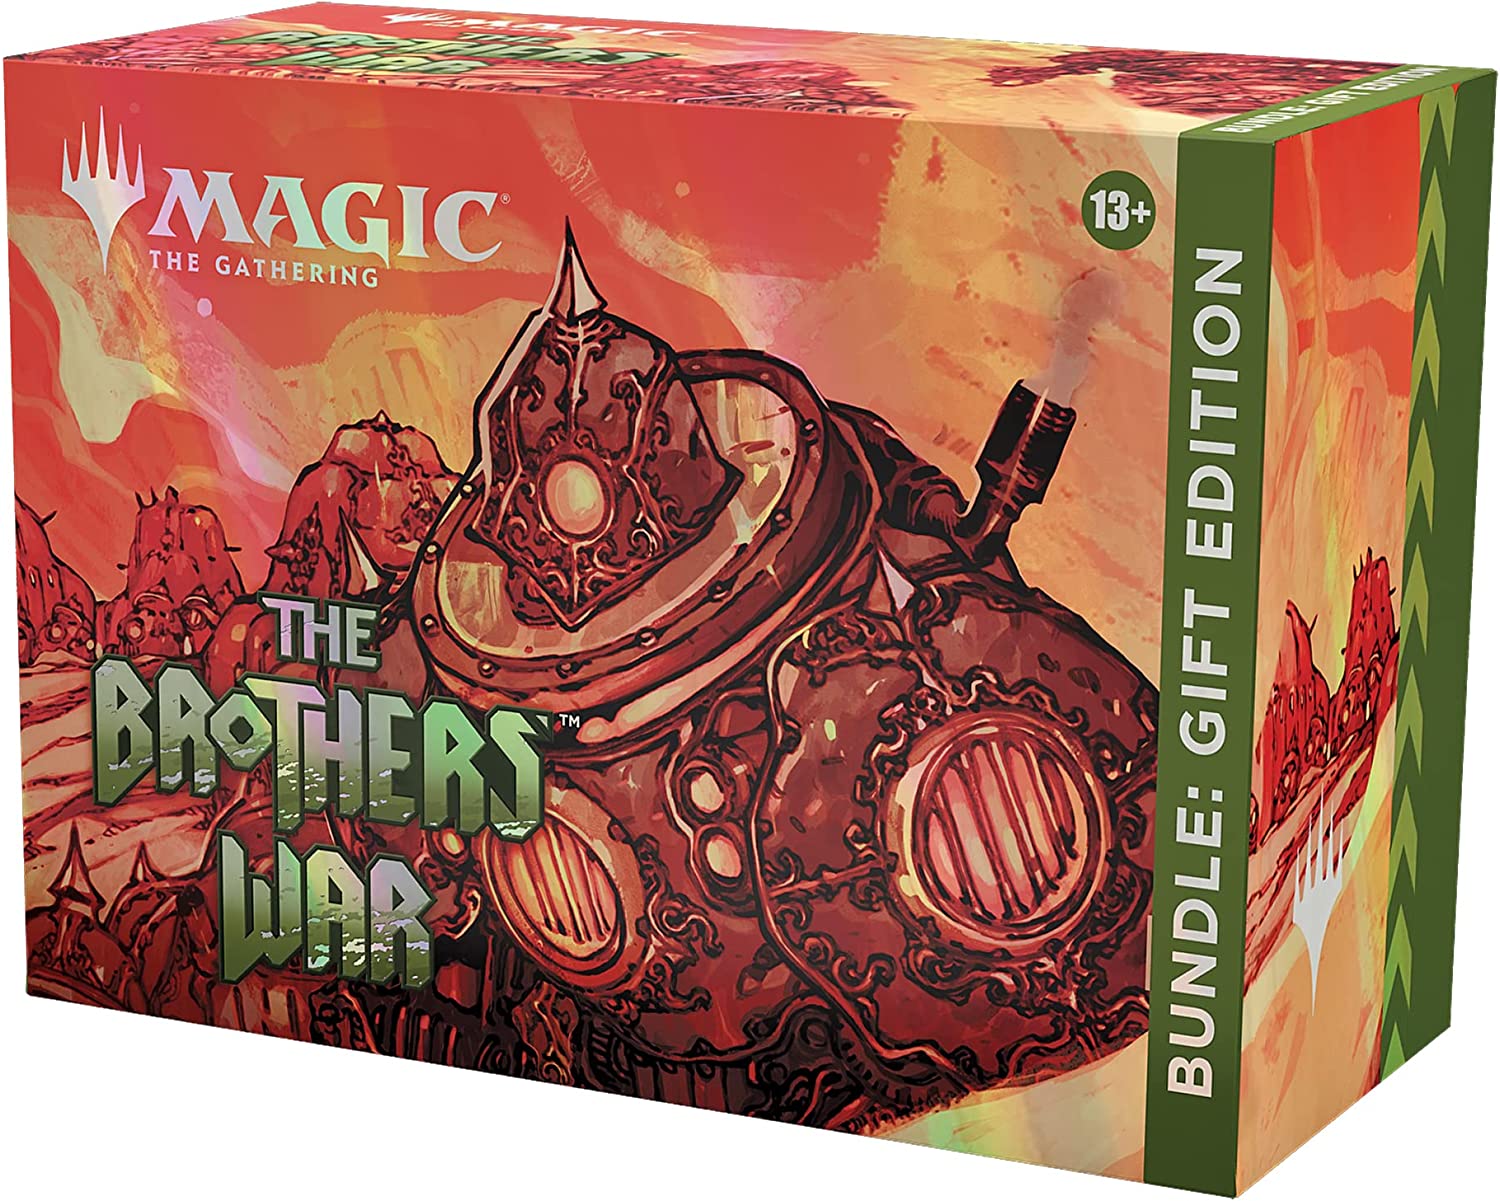 Magic the Gathering: The Brothers' War - Bundle Gift Edition